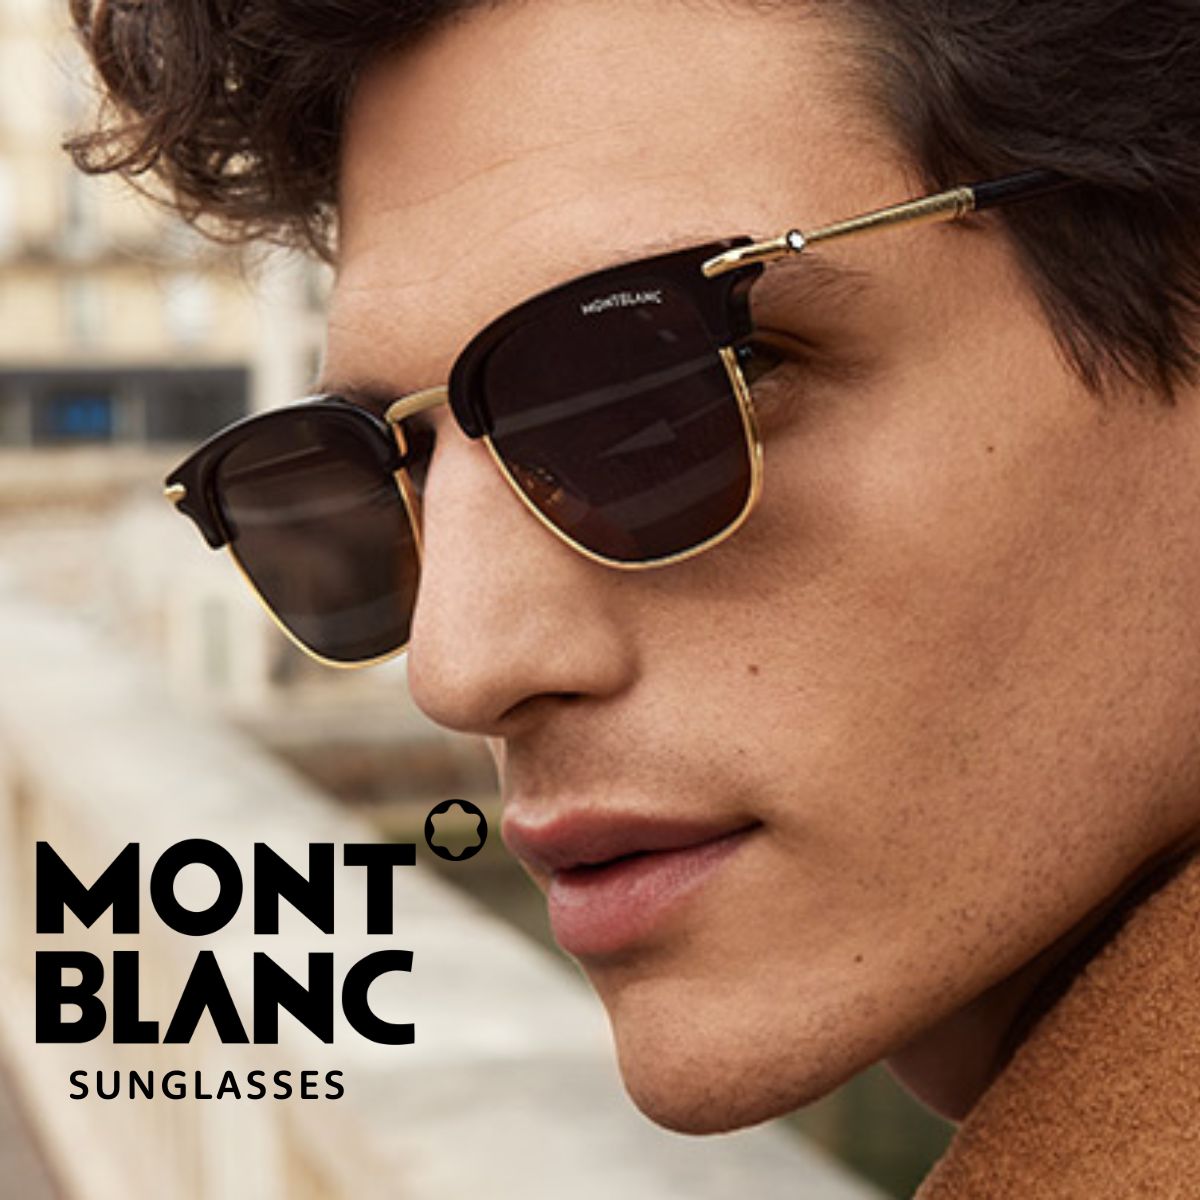 "Assorted Mont Blanc sunglasses from Optorium's curated collection for men and women, highlighting luxury eyewear with eye protection, available with free shipping and easy returns."